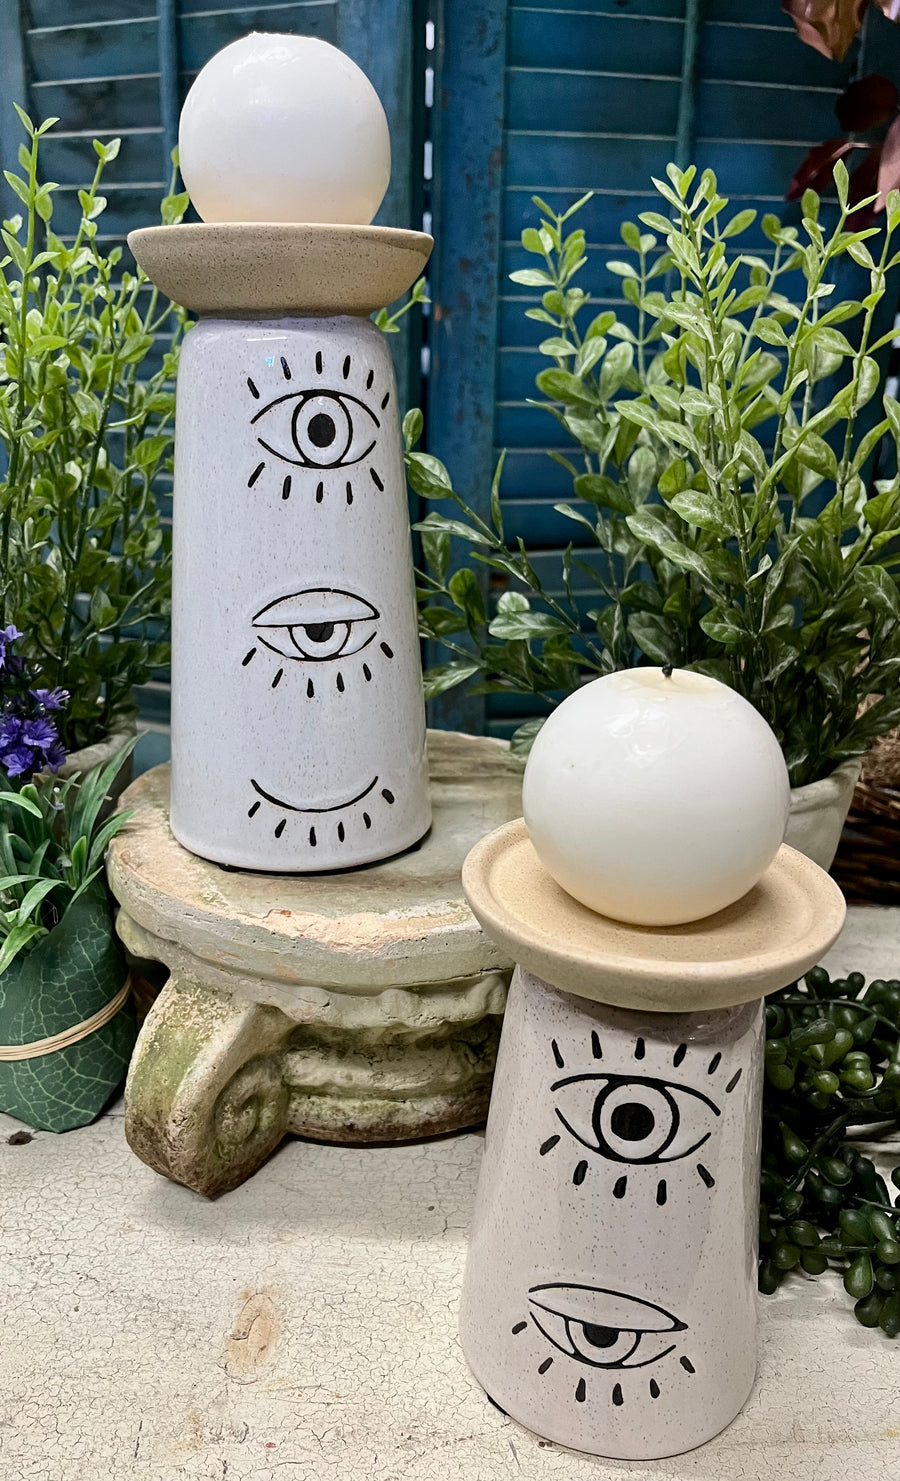 CERAMIC CANDLE HOLDERS WITH EYES